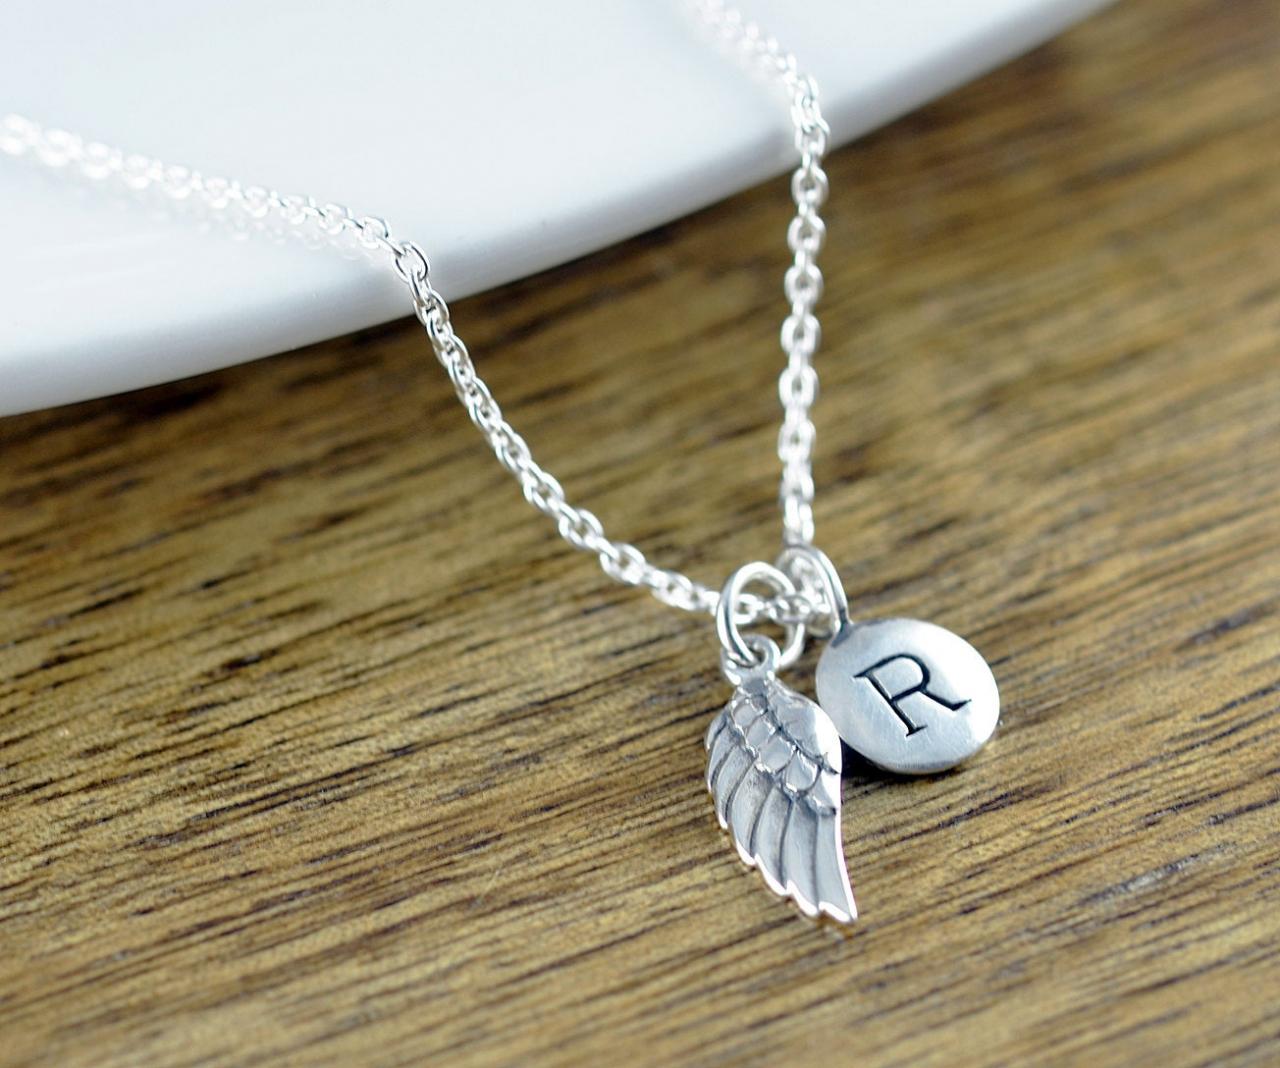 Personalized Silver Wing Necklace - Remembrance Jewelry - Guardian Angel Wing Necklace - Initial Necklace - Infant Loss Necklace